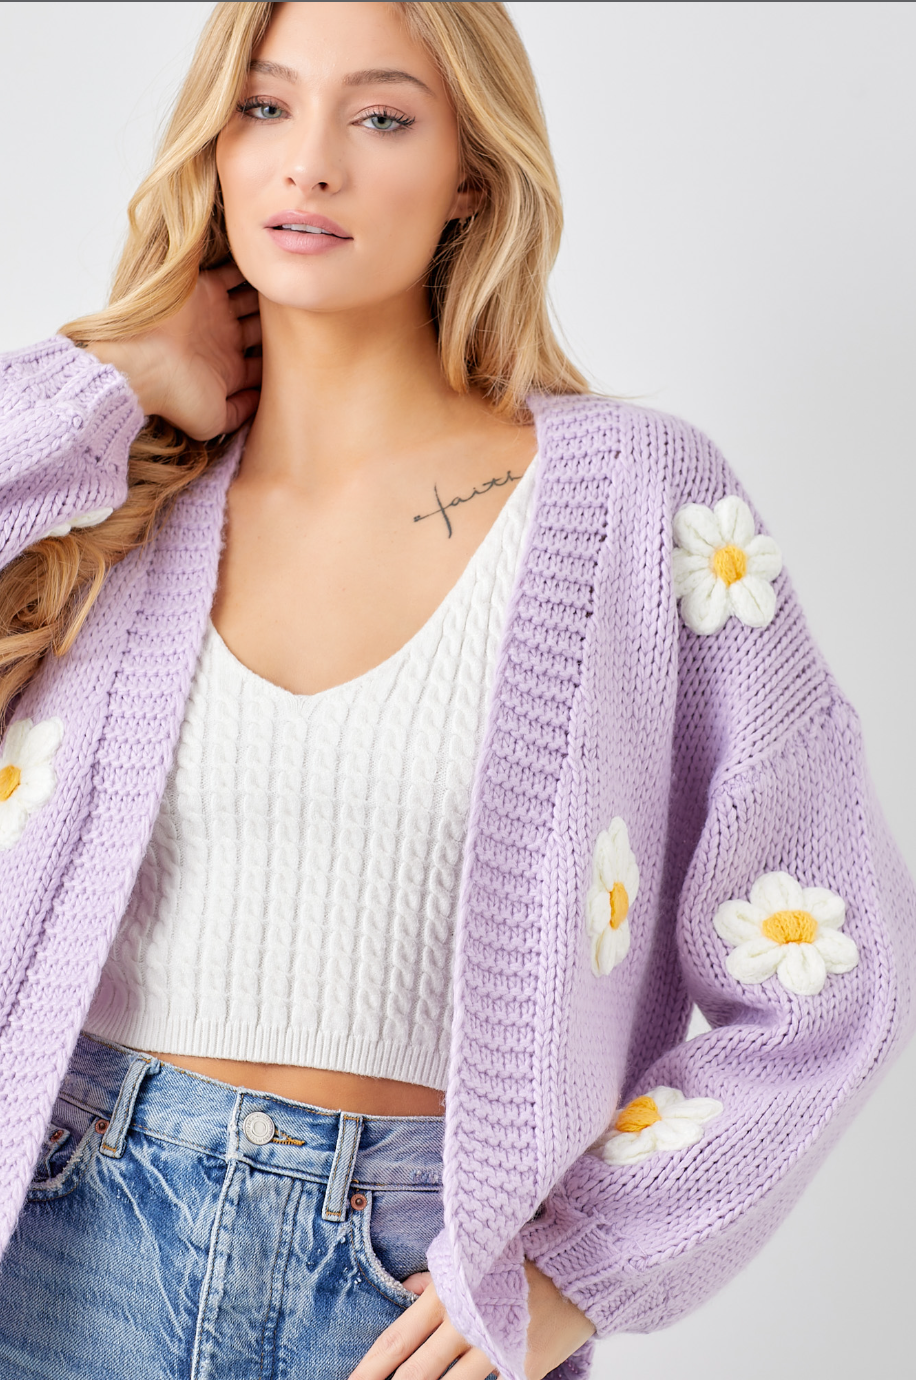 Daisy Print Cropped Sweater